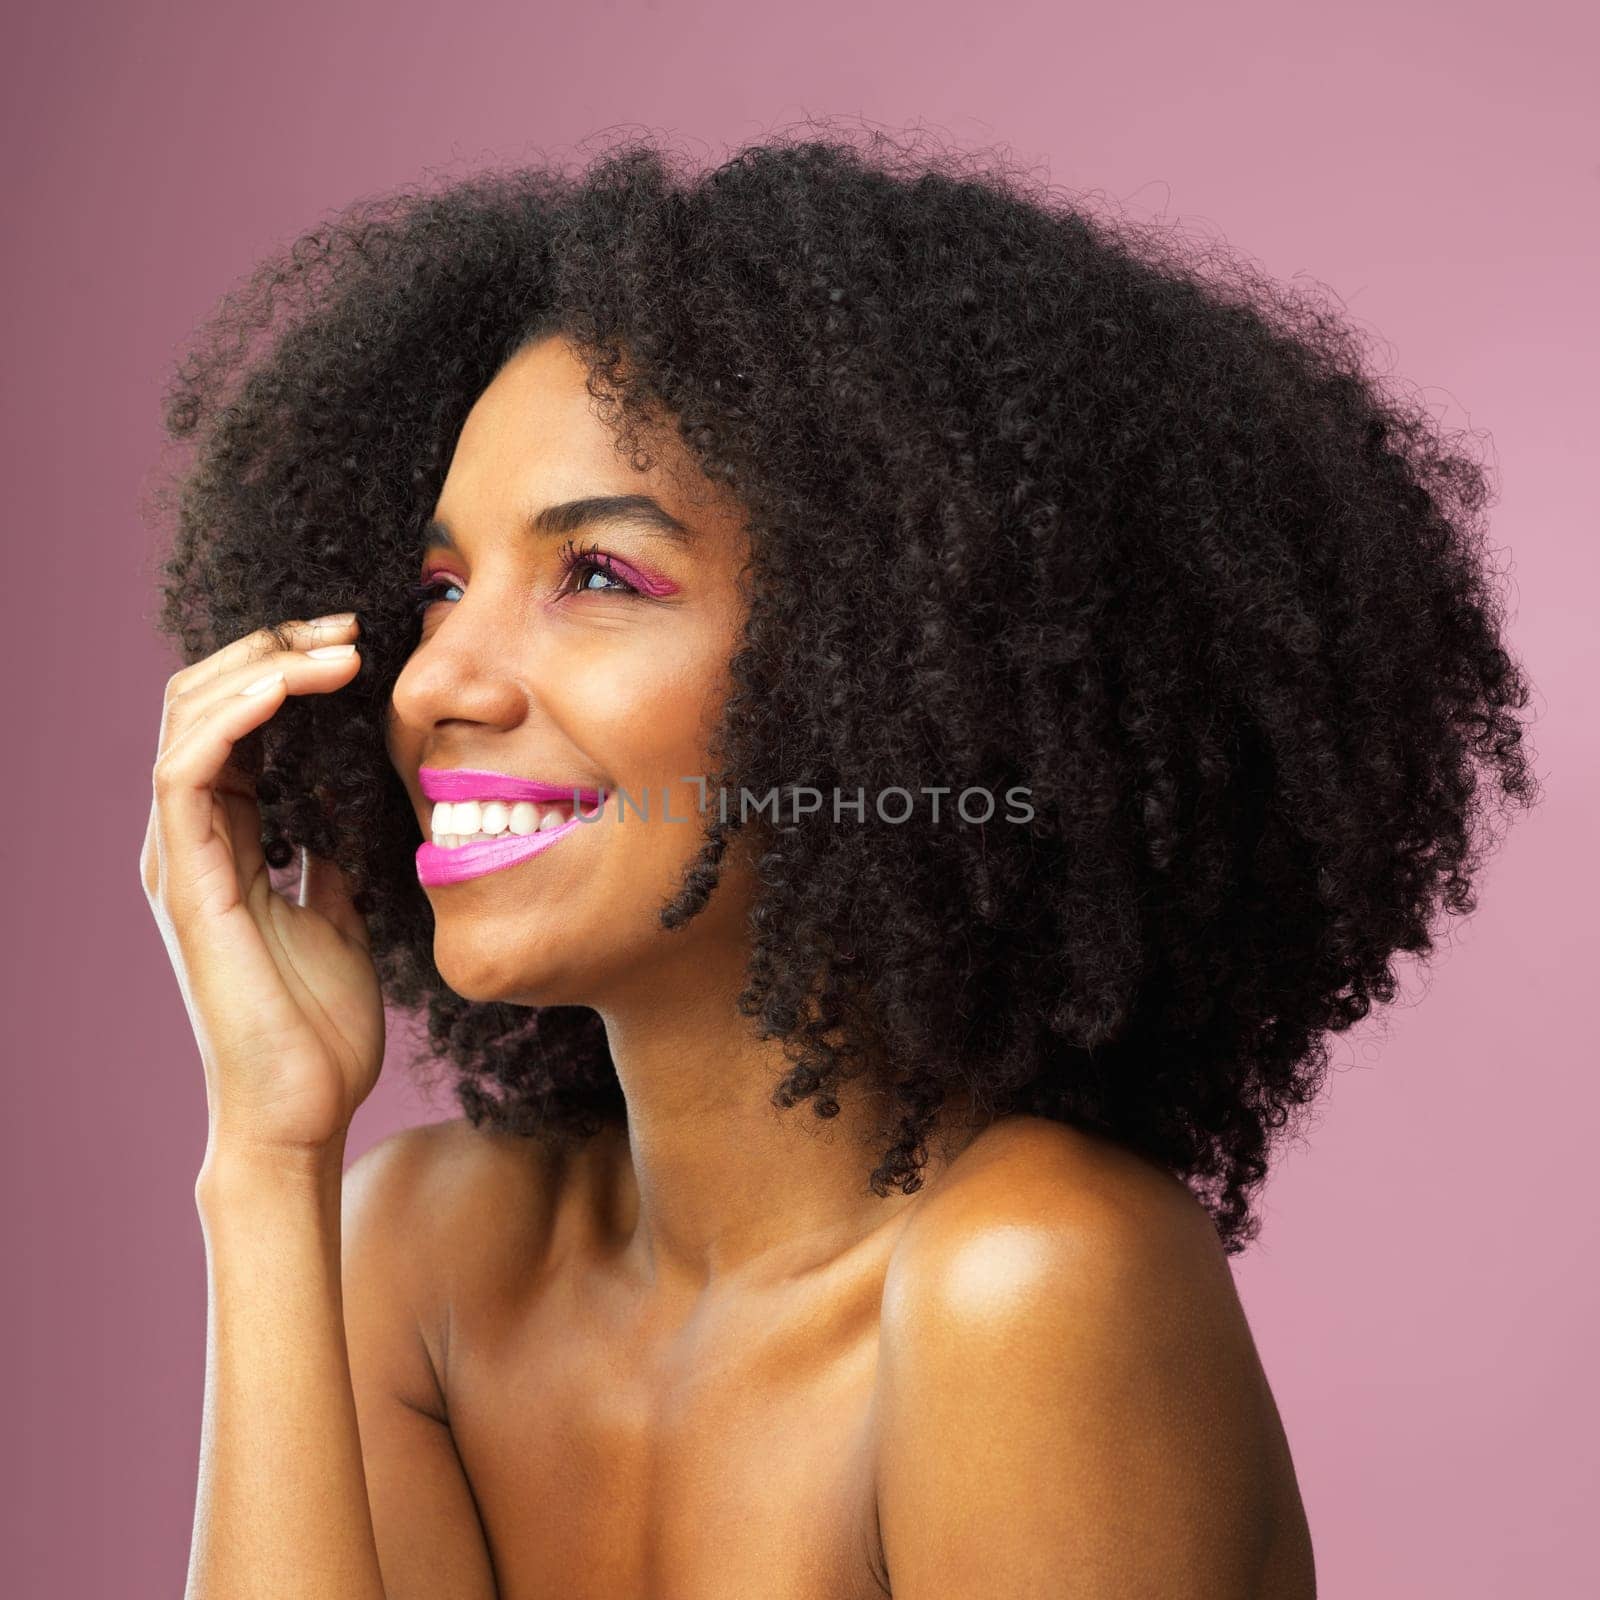 No beauty shines brighter than happiness. Studio shot of an attractive young woman posing against a pink background. by YuriArcurs